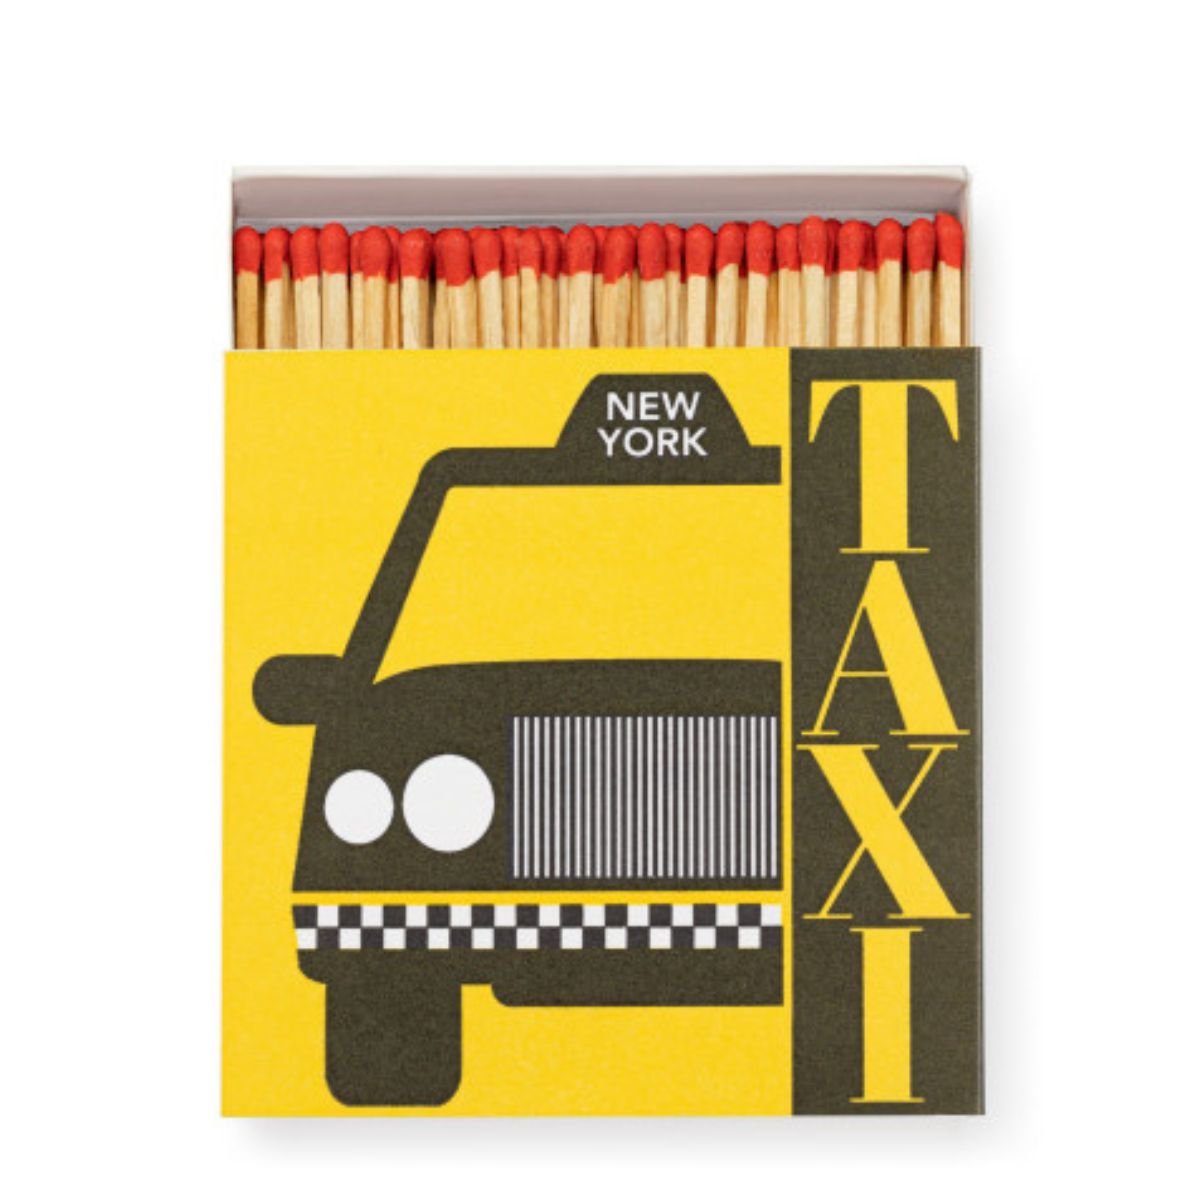 Luxury Matches - NYC Taxi - Life of Riley